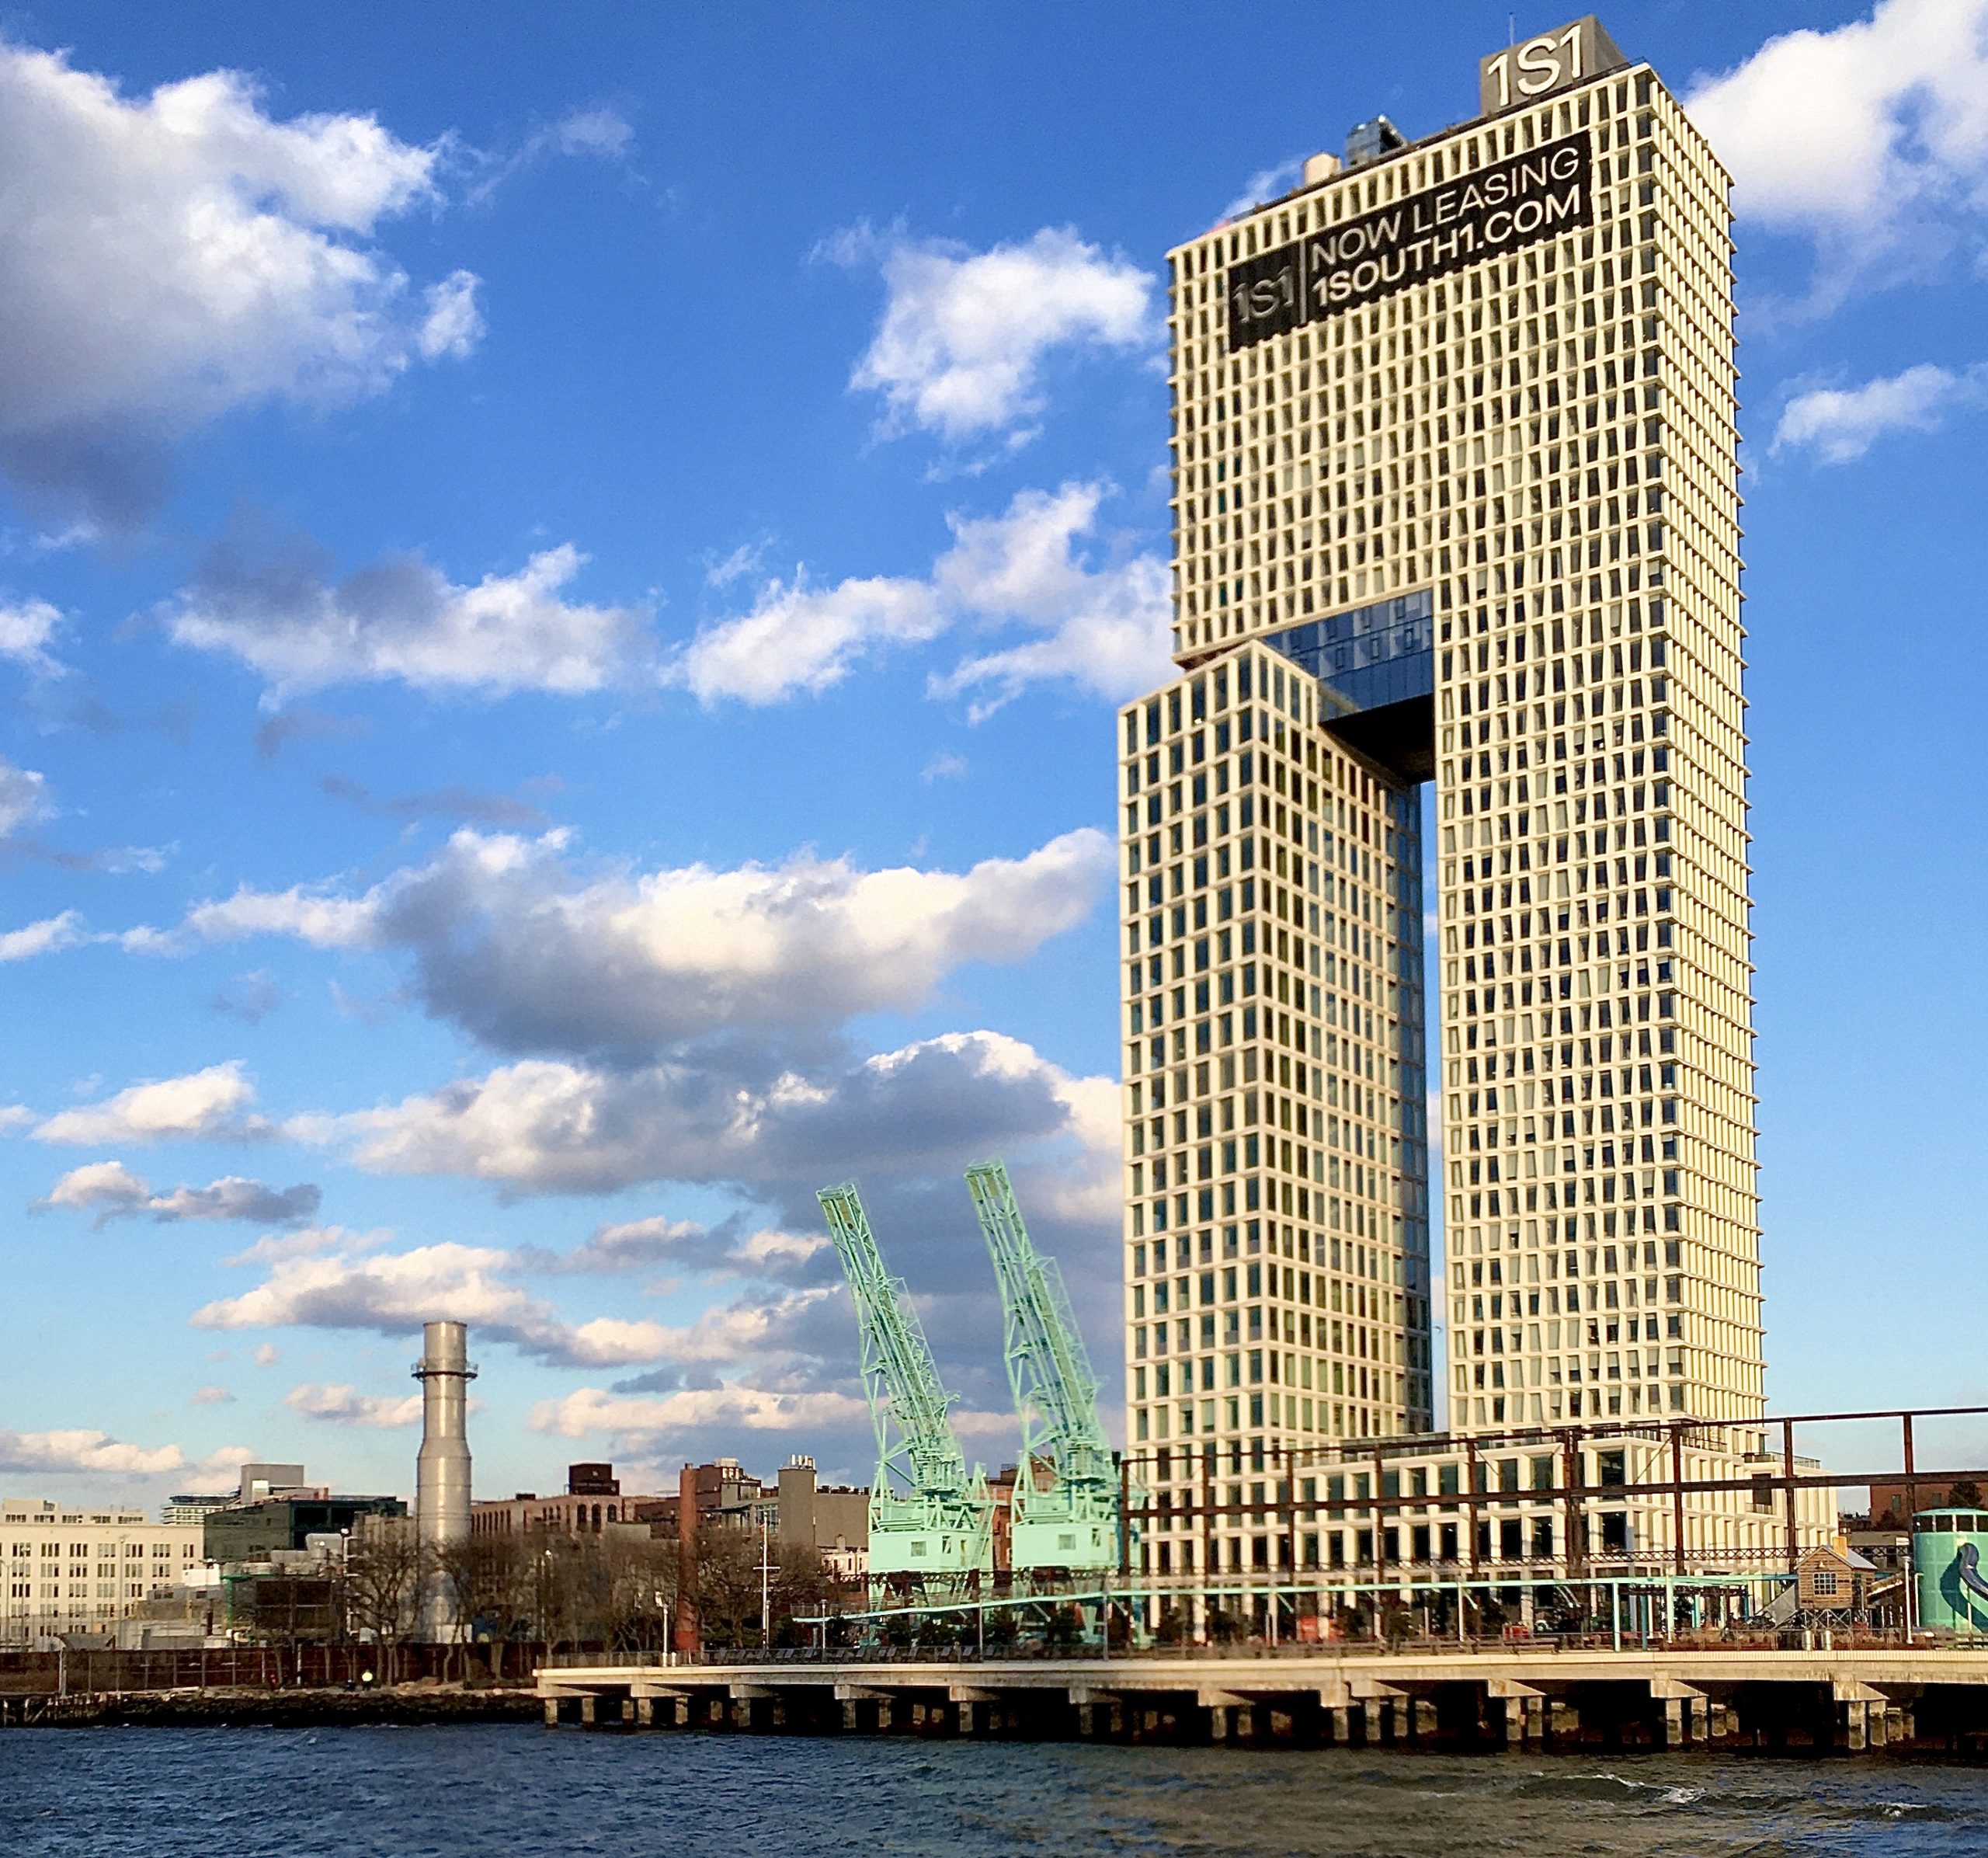 The tall building is One South First, as seen from the NYC Ferry. Photo: Lore Croghan/Brooklyn Eagle